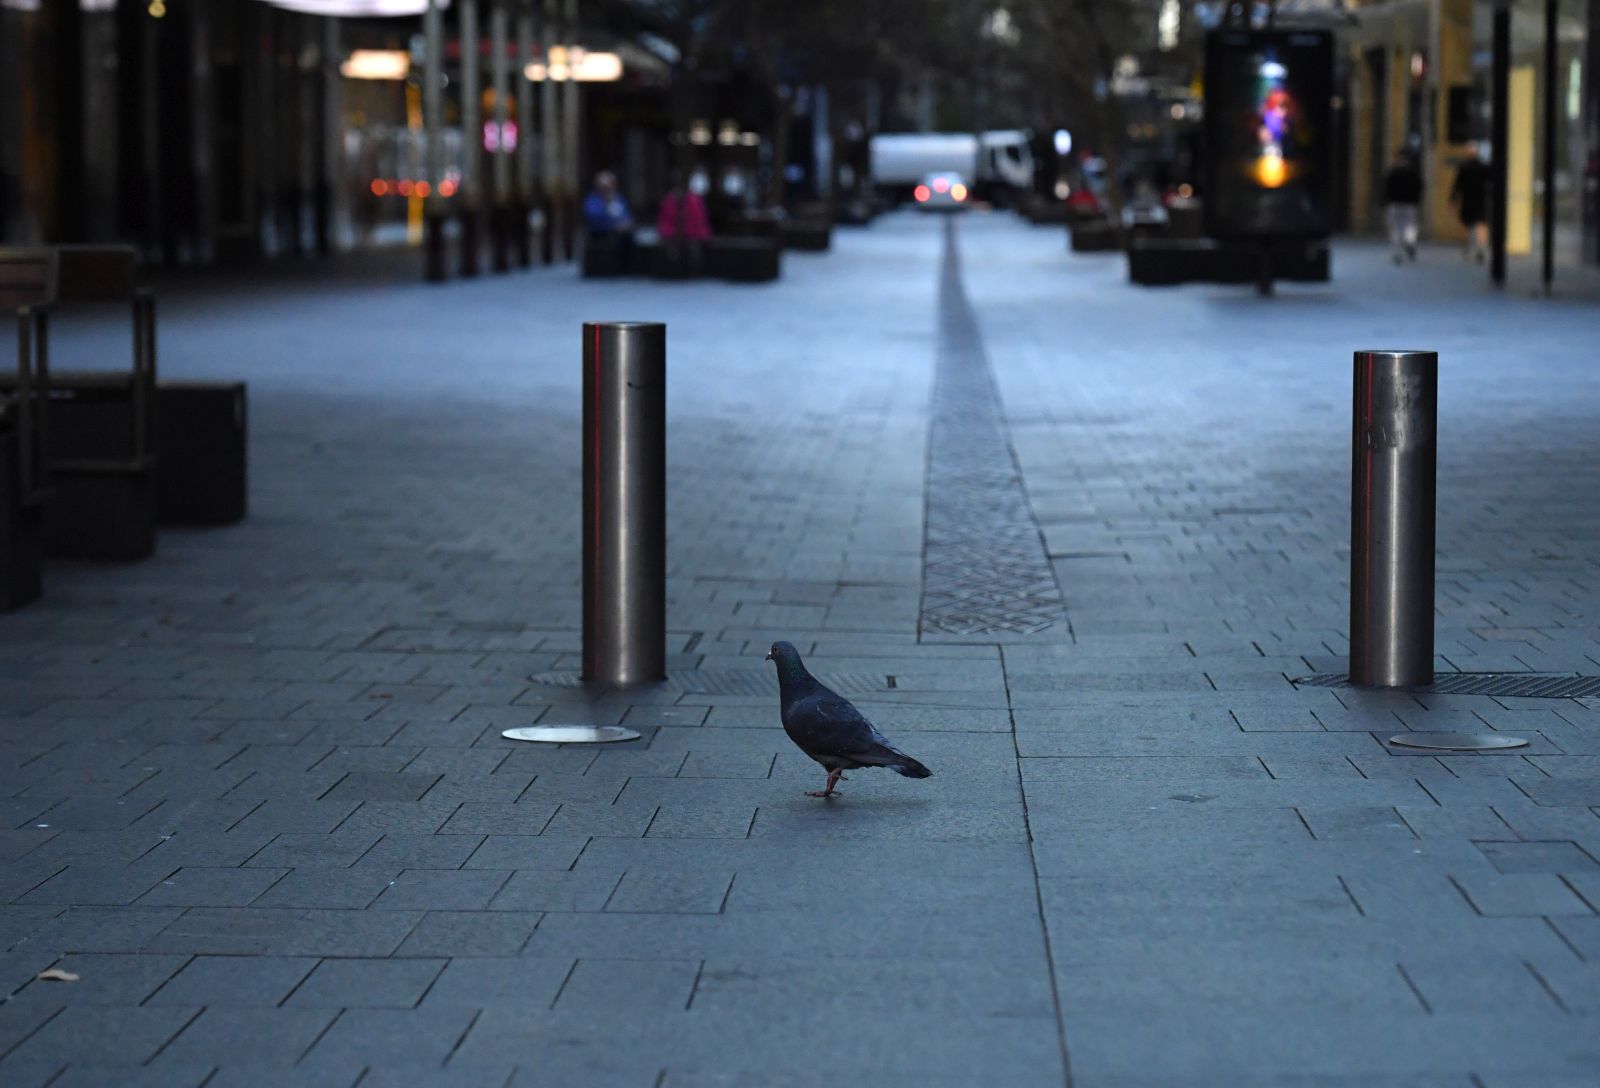 epa09375685 A pigeon at a near empty Pitt Street Mall in the central business district (CBD) in Sydney, New South Wales (NSW), Australia, 29 July 2021. NSW recorded 236 new locally acquired cases of COVID-19 in the 24 hours to 8pm last night.  EPA/MICK TSIKAS  AUSTRALIA AND NEW ZEALAND OUT